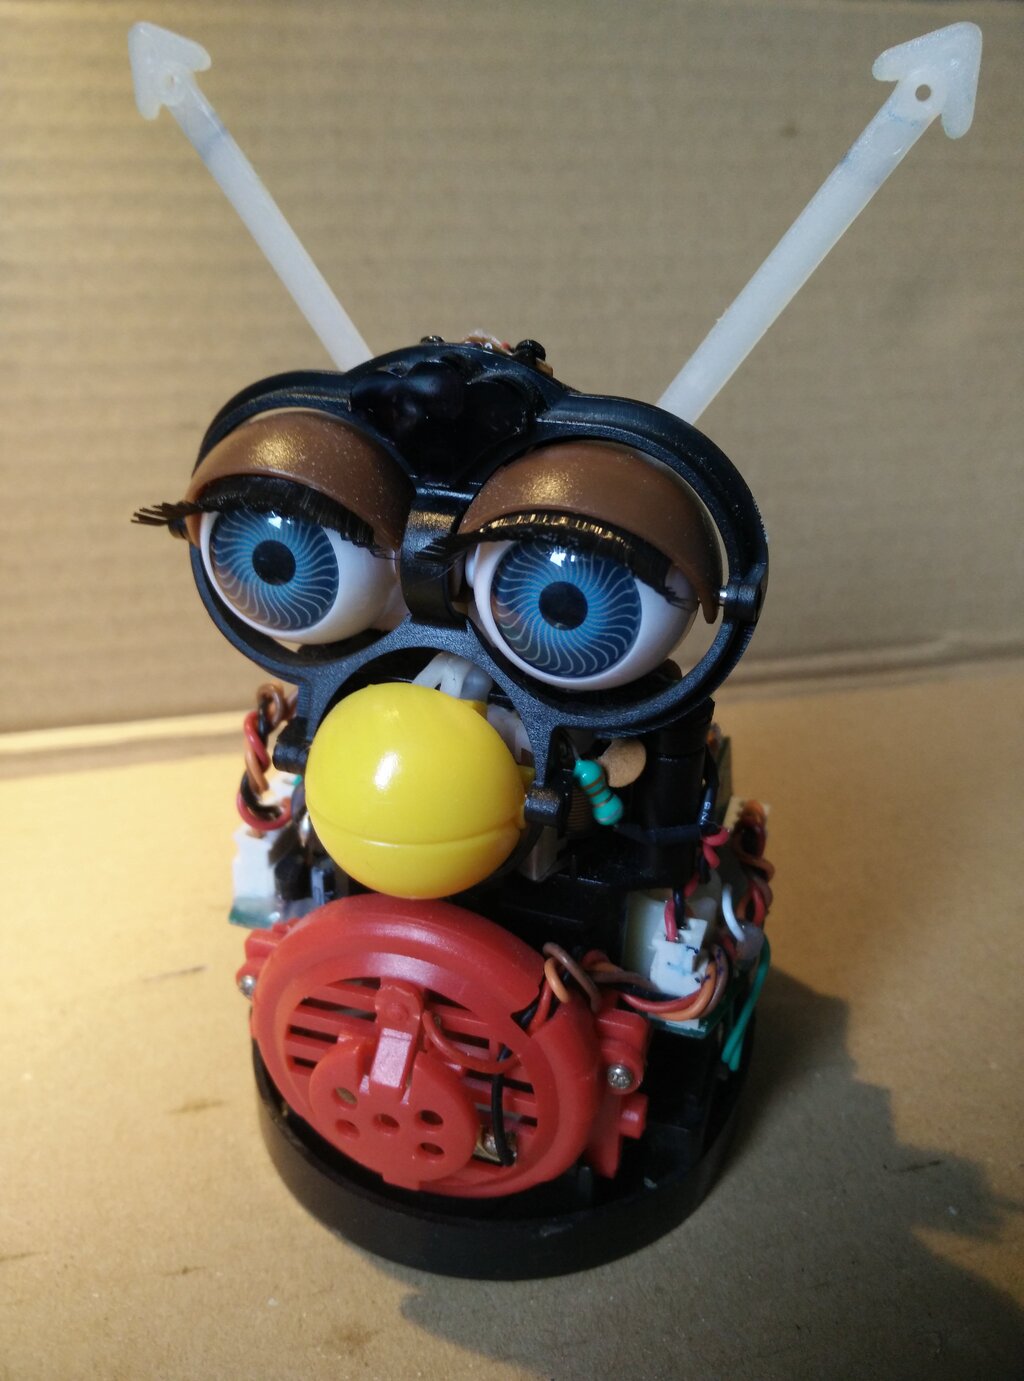 The original Furby with its fur and carapace removed